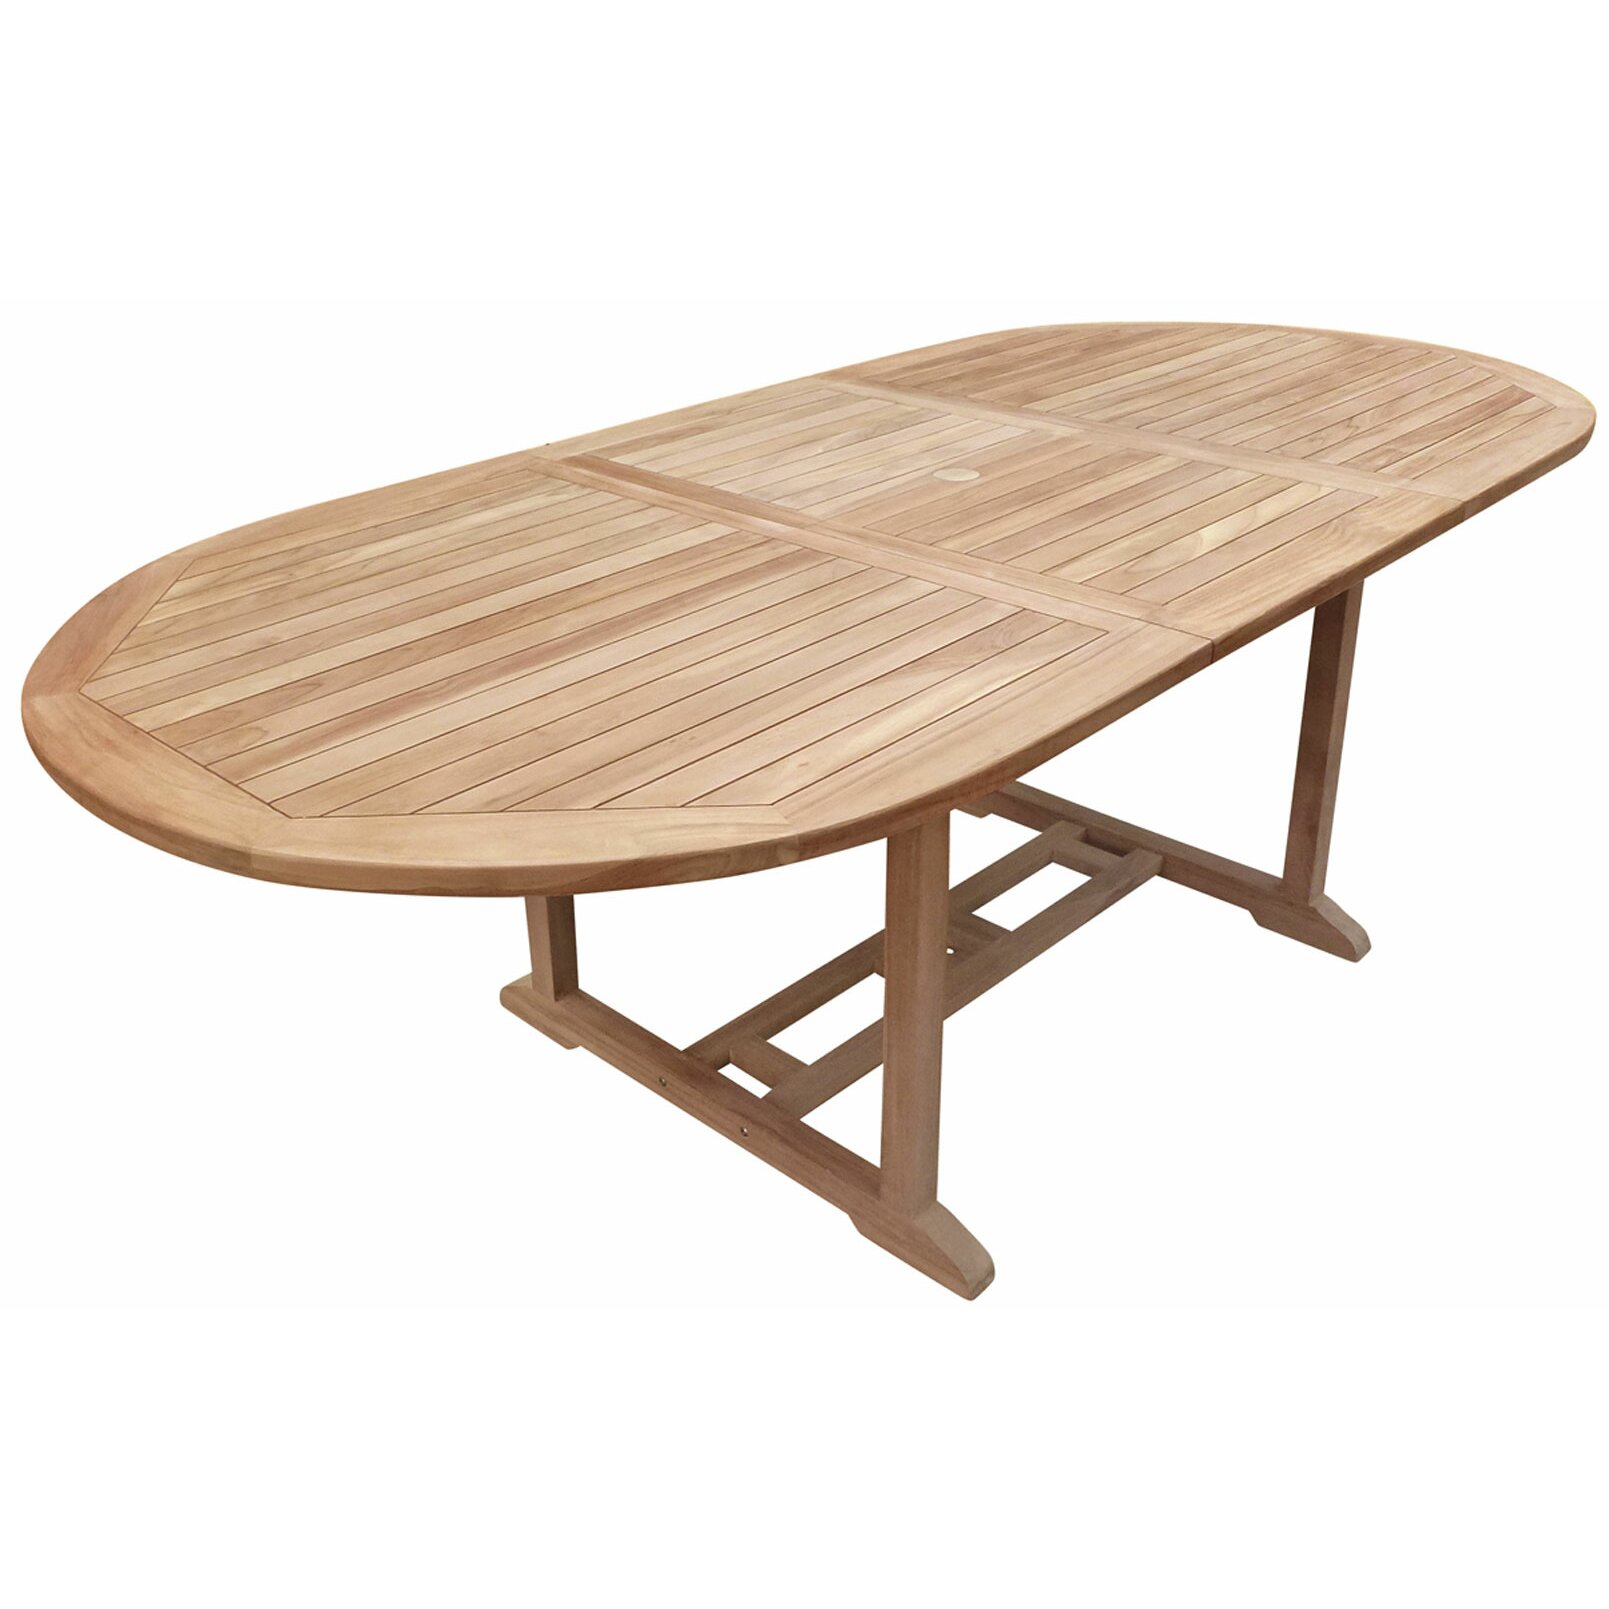 Cossette Wood Dining Table